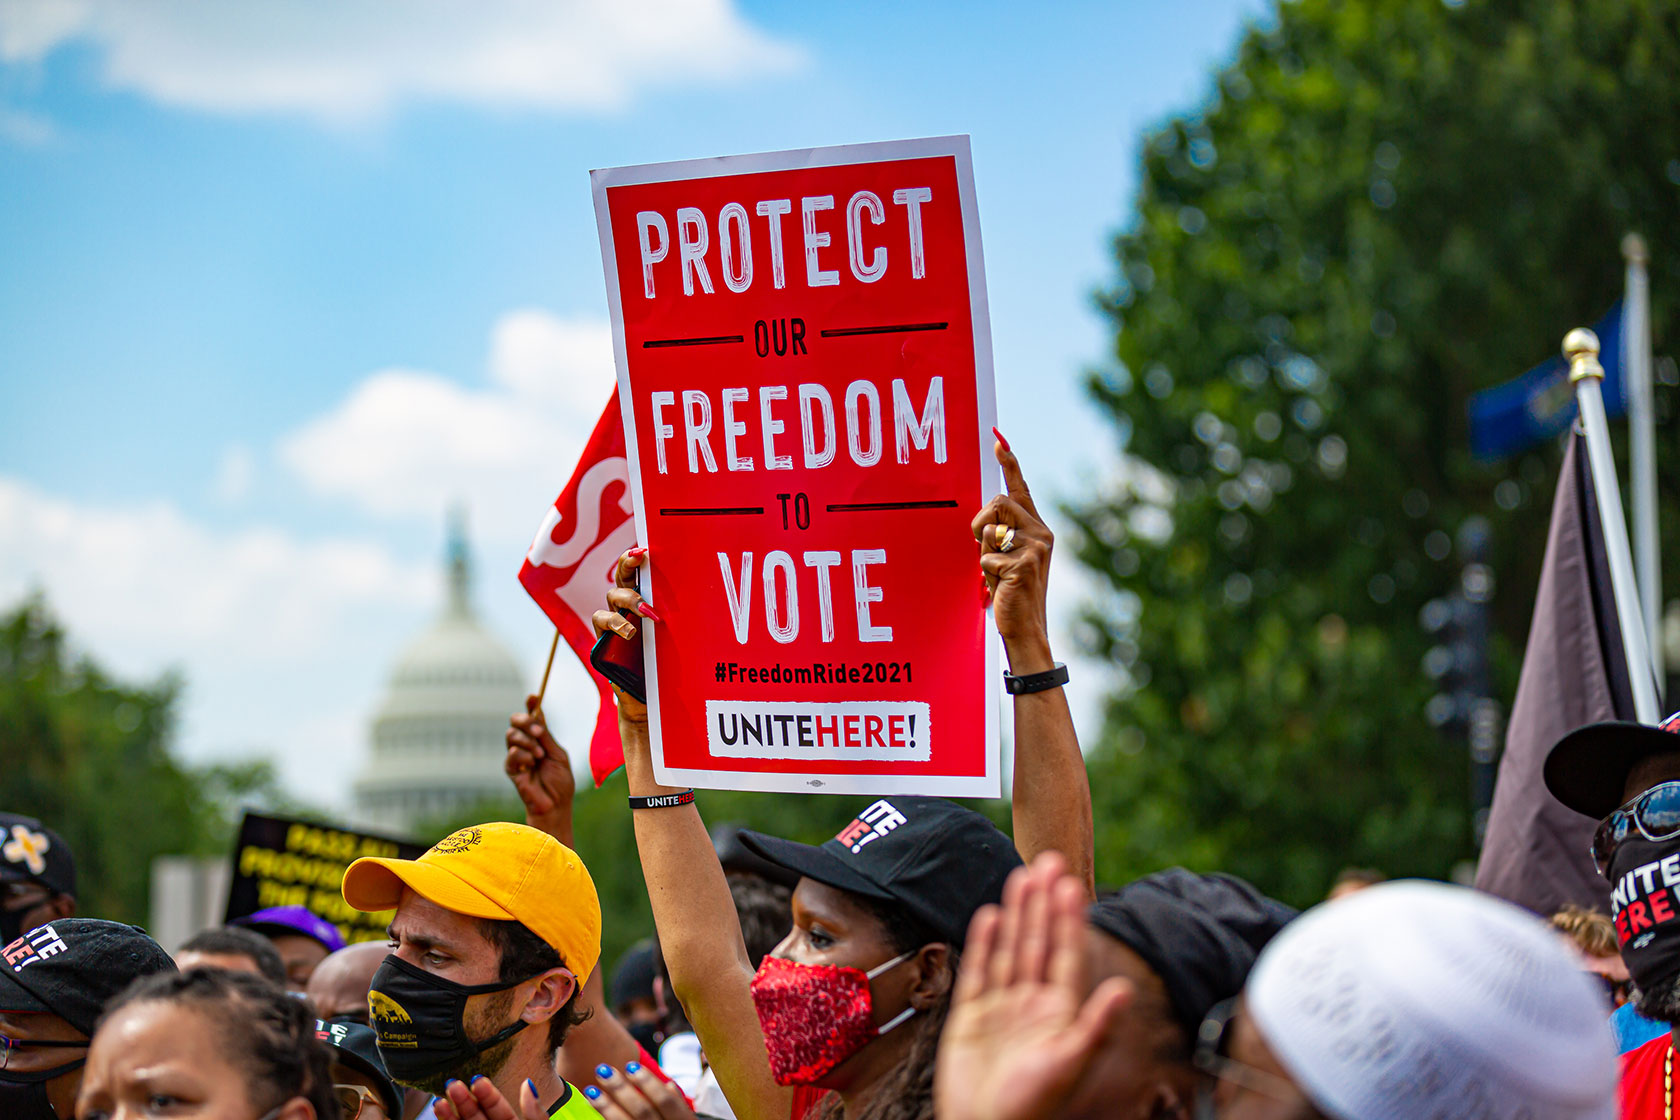 Voting rights advocates from across the country gather in Washington, D.C.